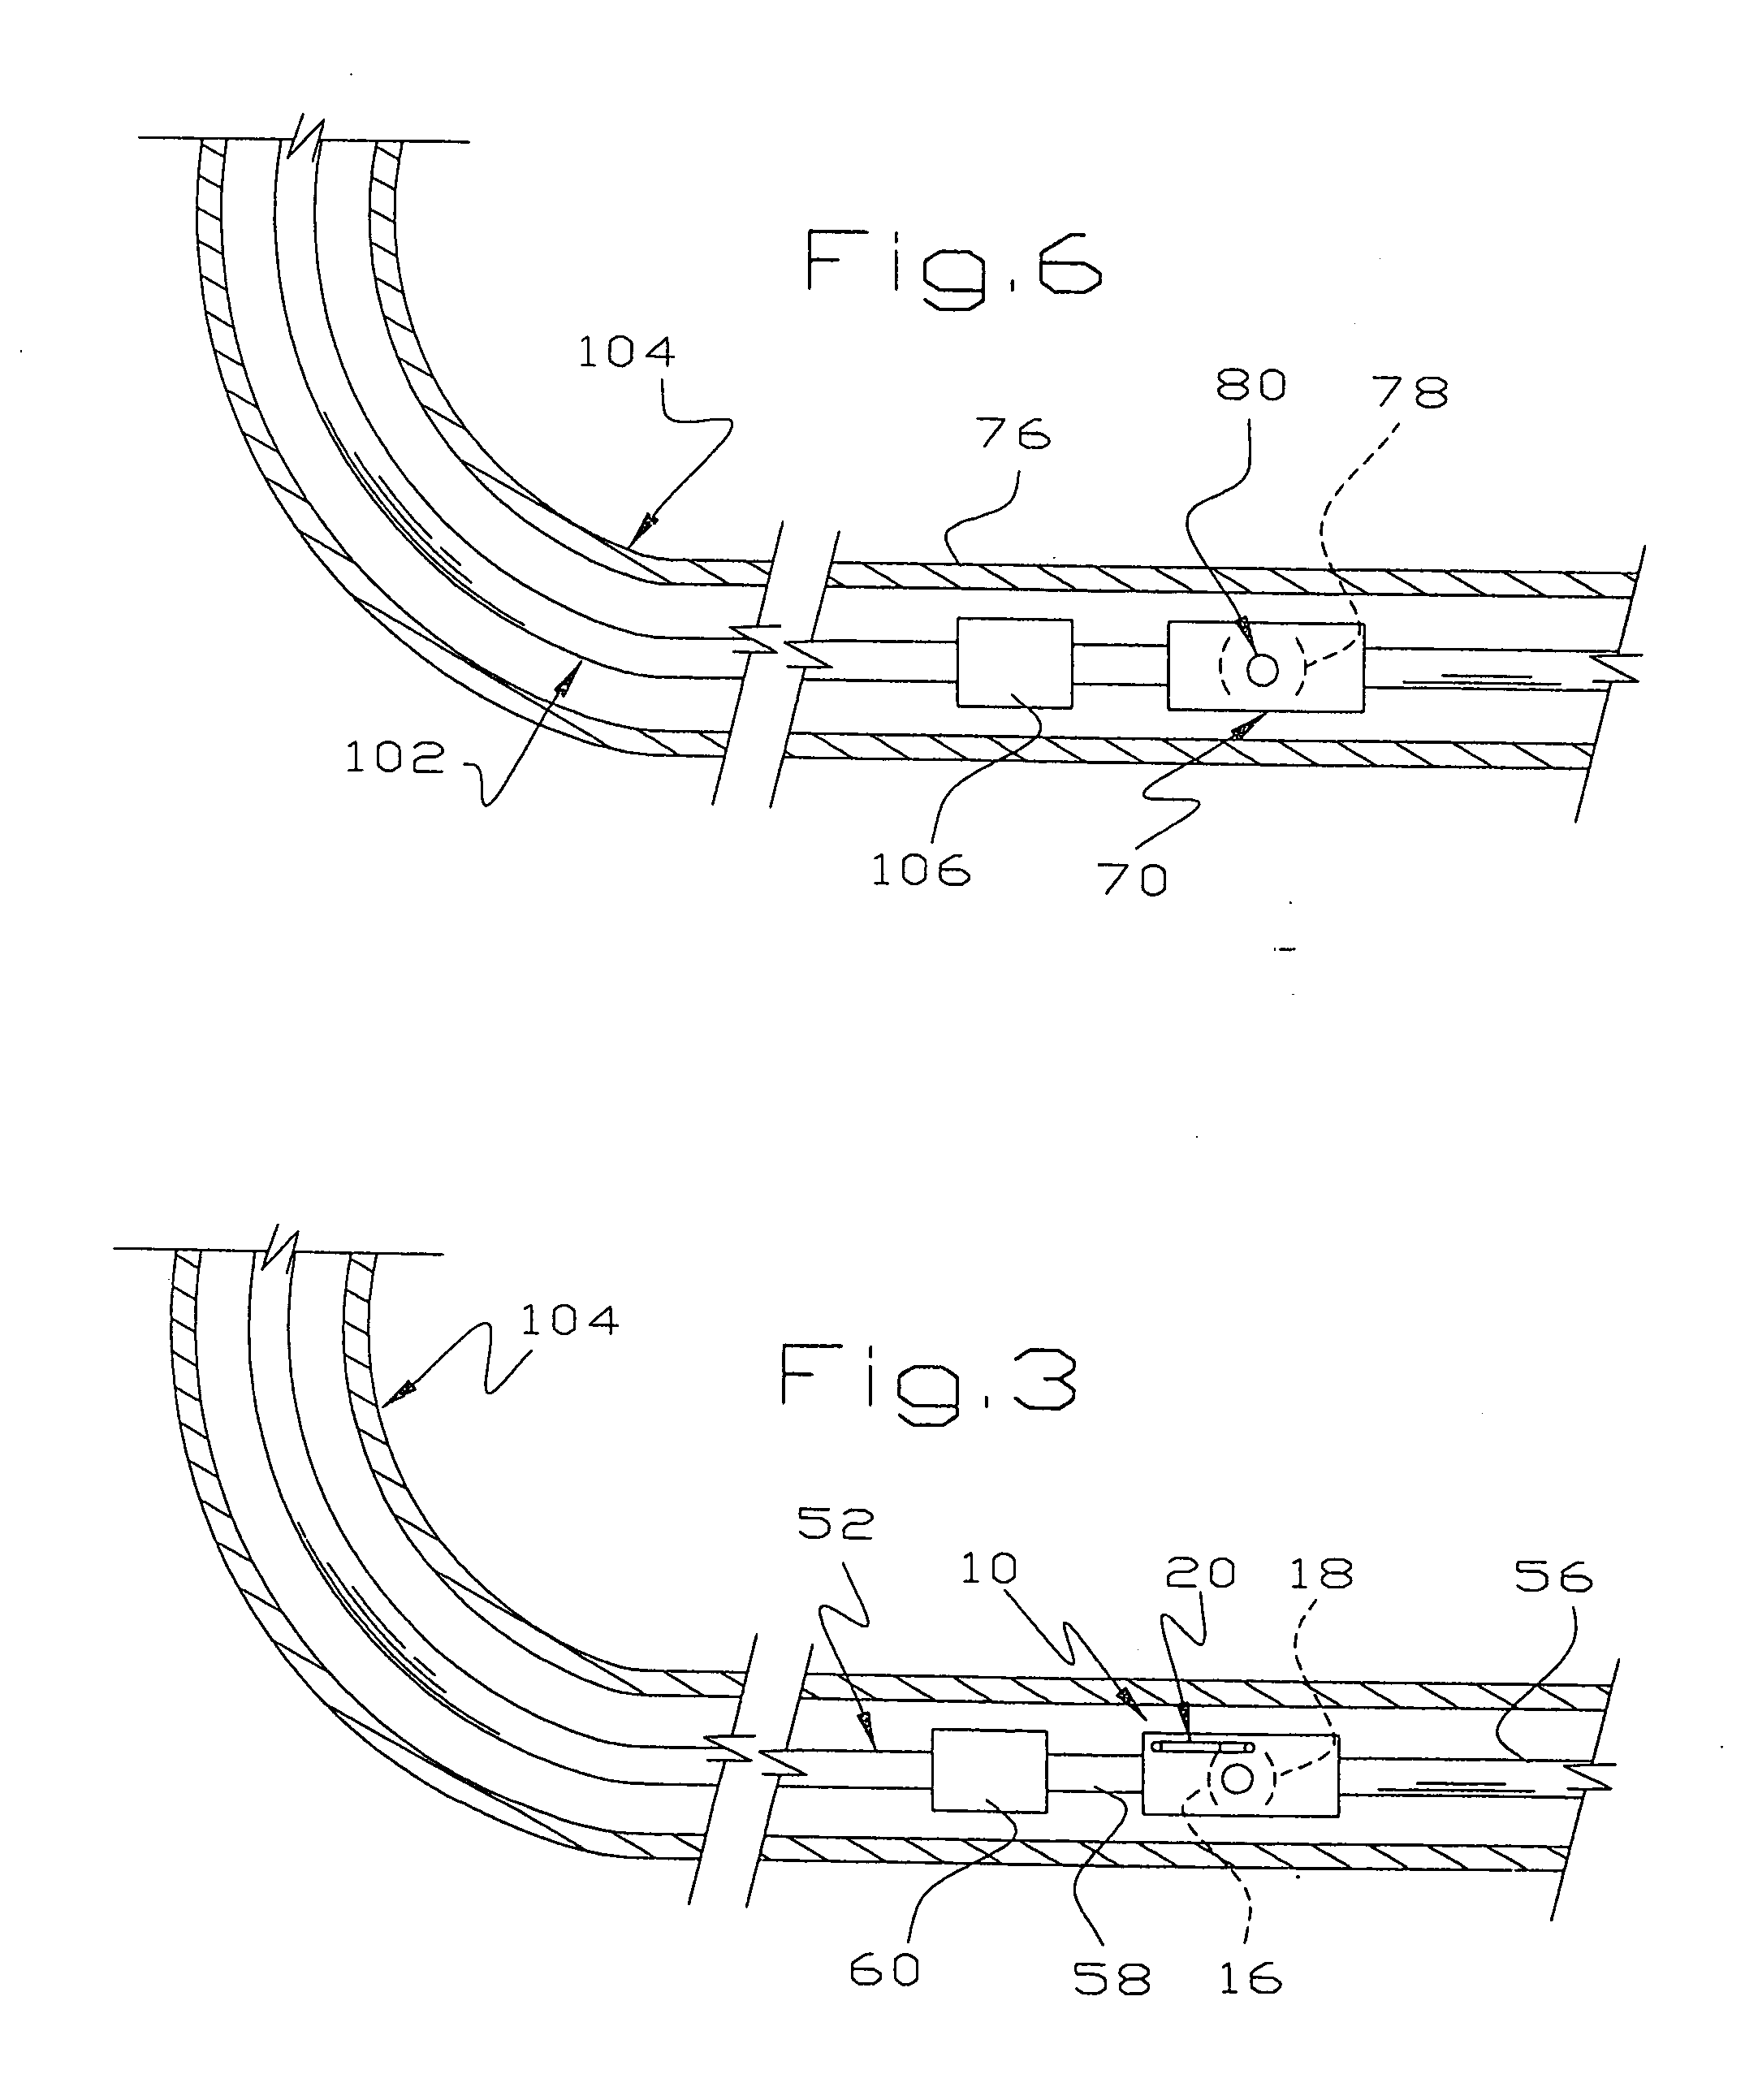 Isolation tool actuated by gas generation